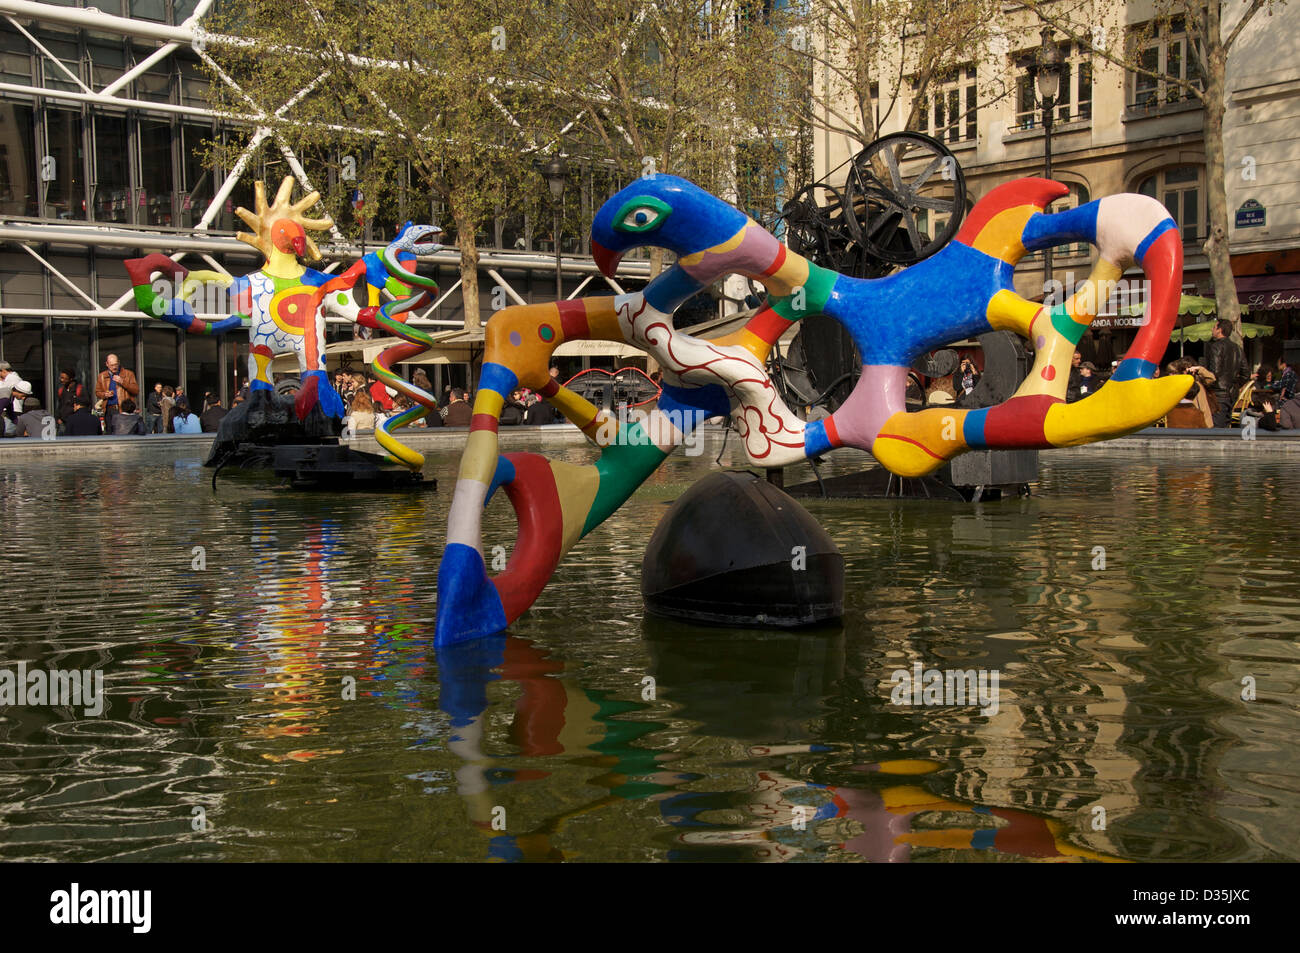 The quirky colourful and surreal sculptures of artists Jean Tinguely and Niki de Saint Phalle which make up the Stravinsky fountain in Paris. France. Stock Photo